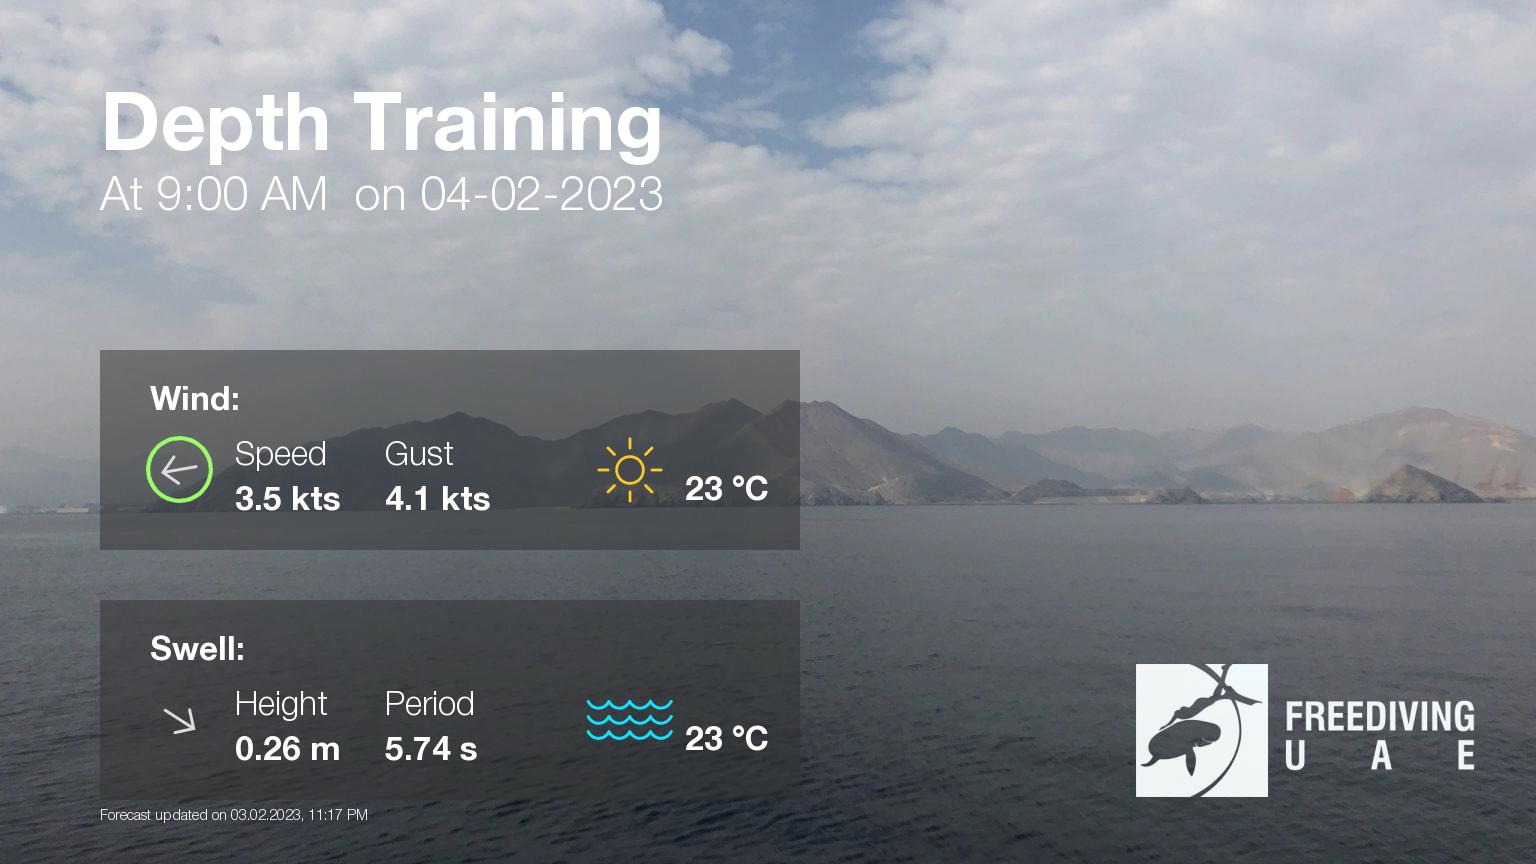 Expected weather during Depth Training on Sat, Feb 4, at 9:00 AM